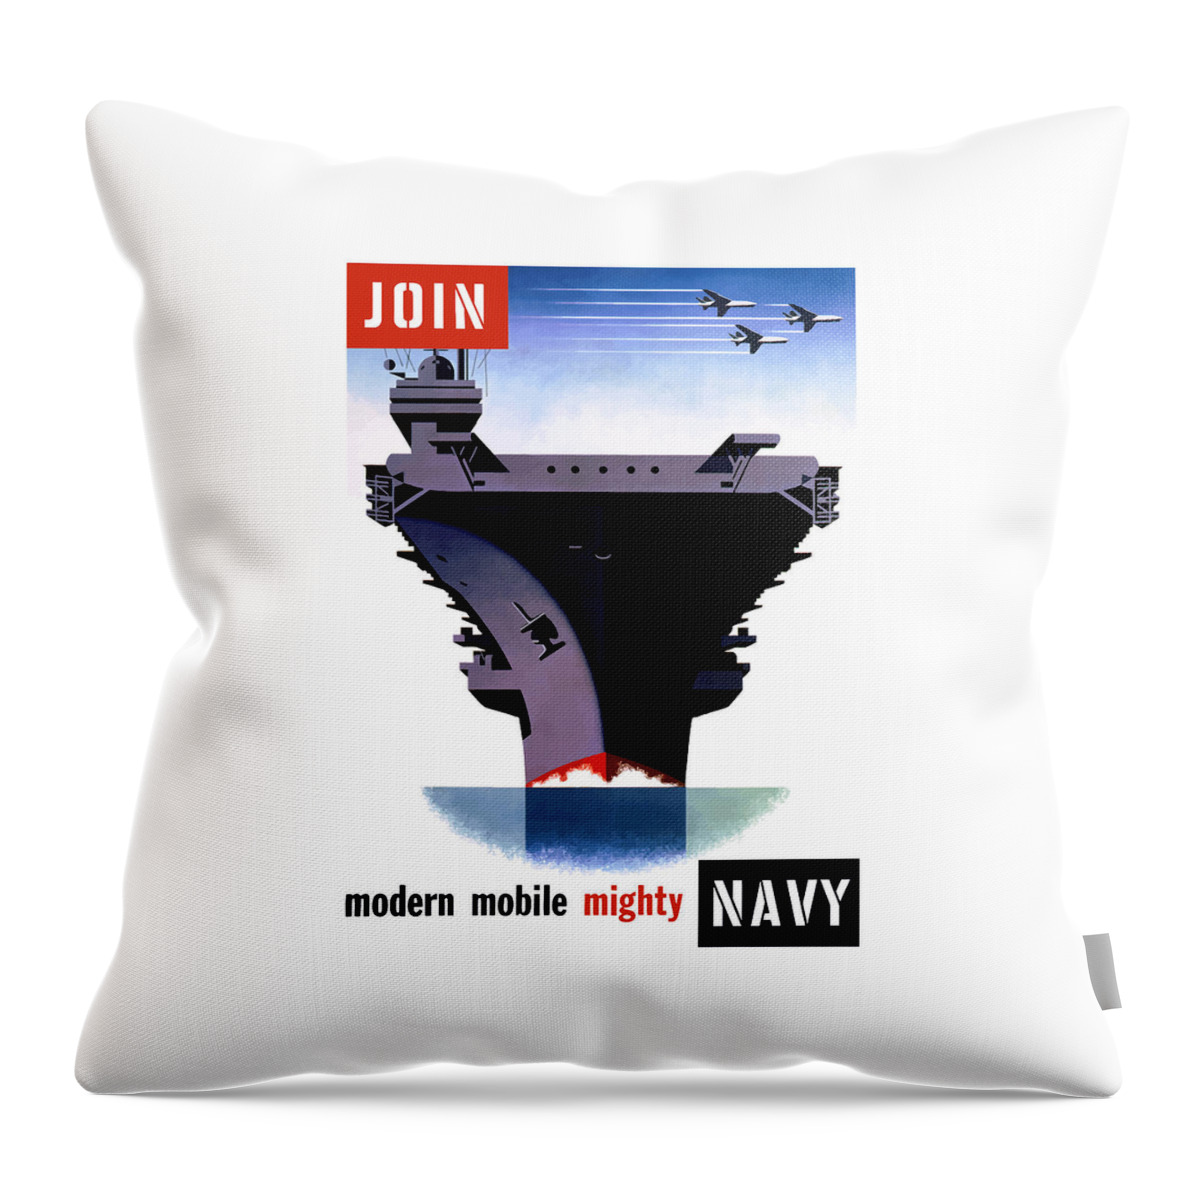 Ww2 Throw Pillow featuring the painting Modern Mobile Mighty Navy by War Is Hell Store